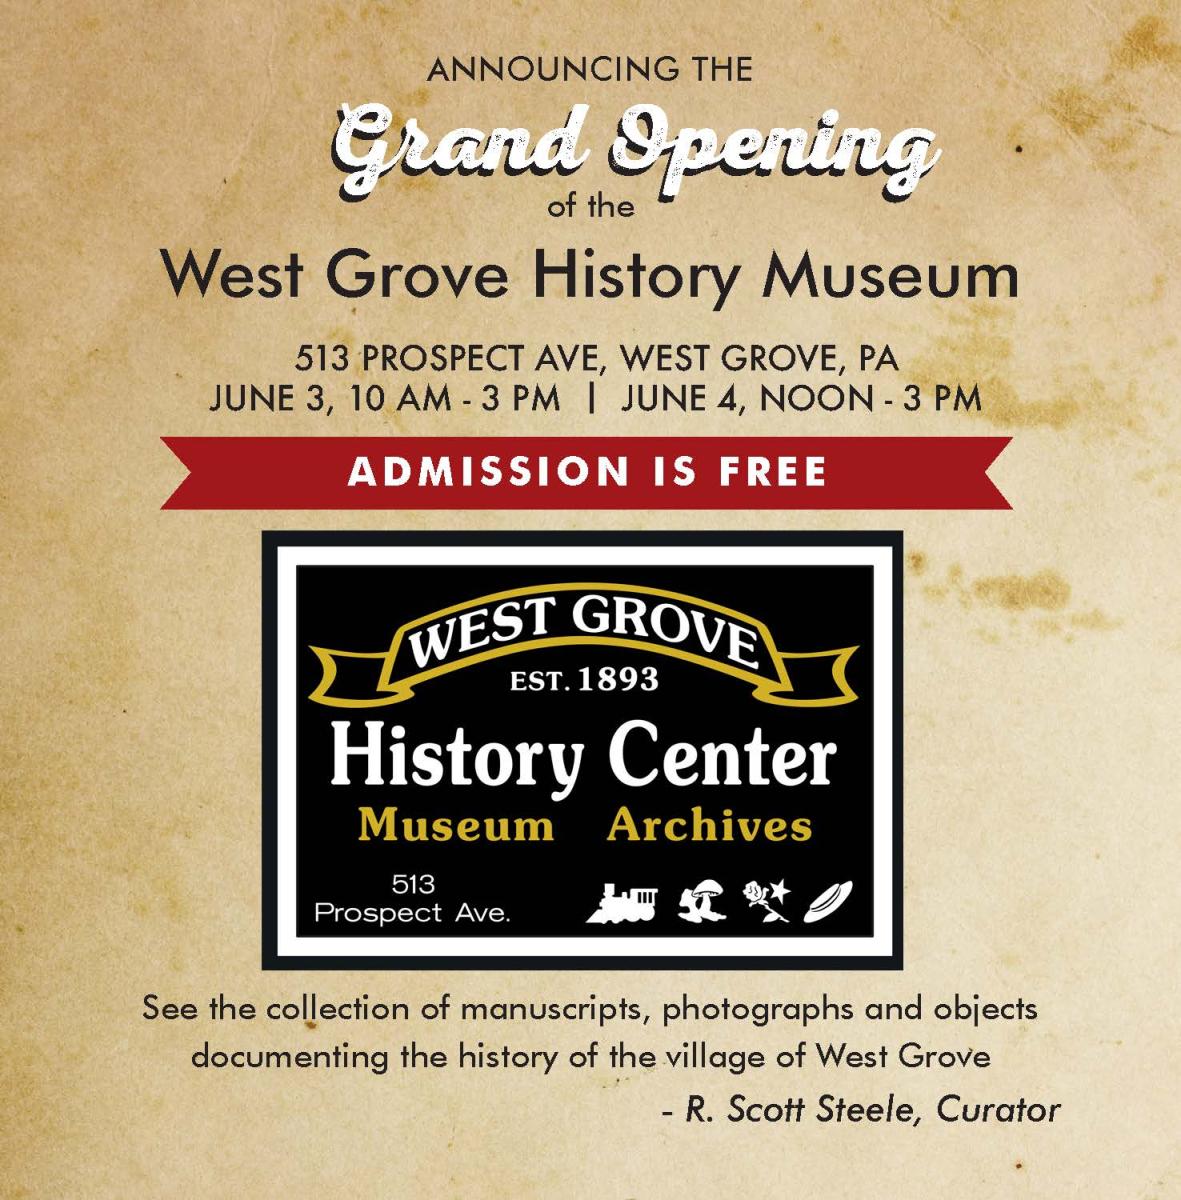 West Grove History Museum - Grand Opening